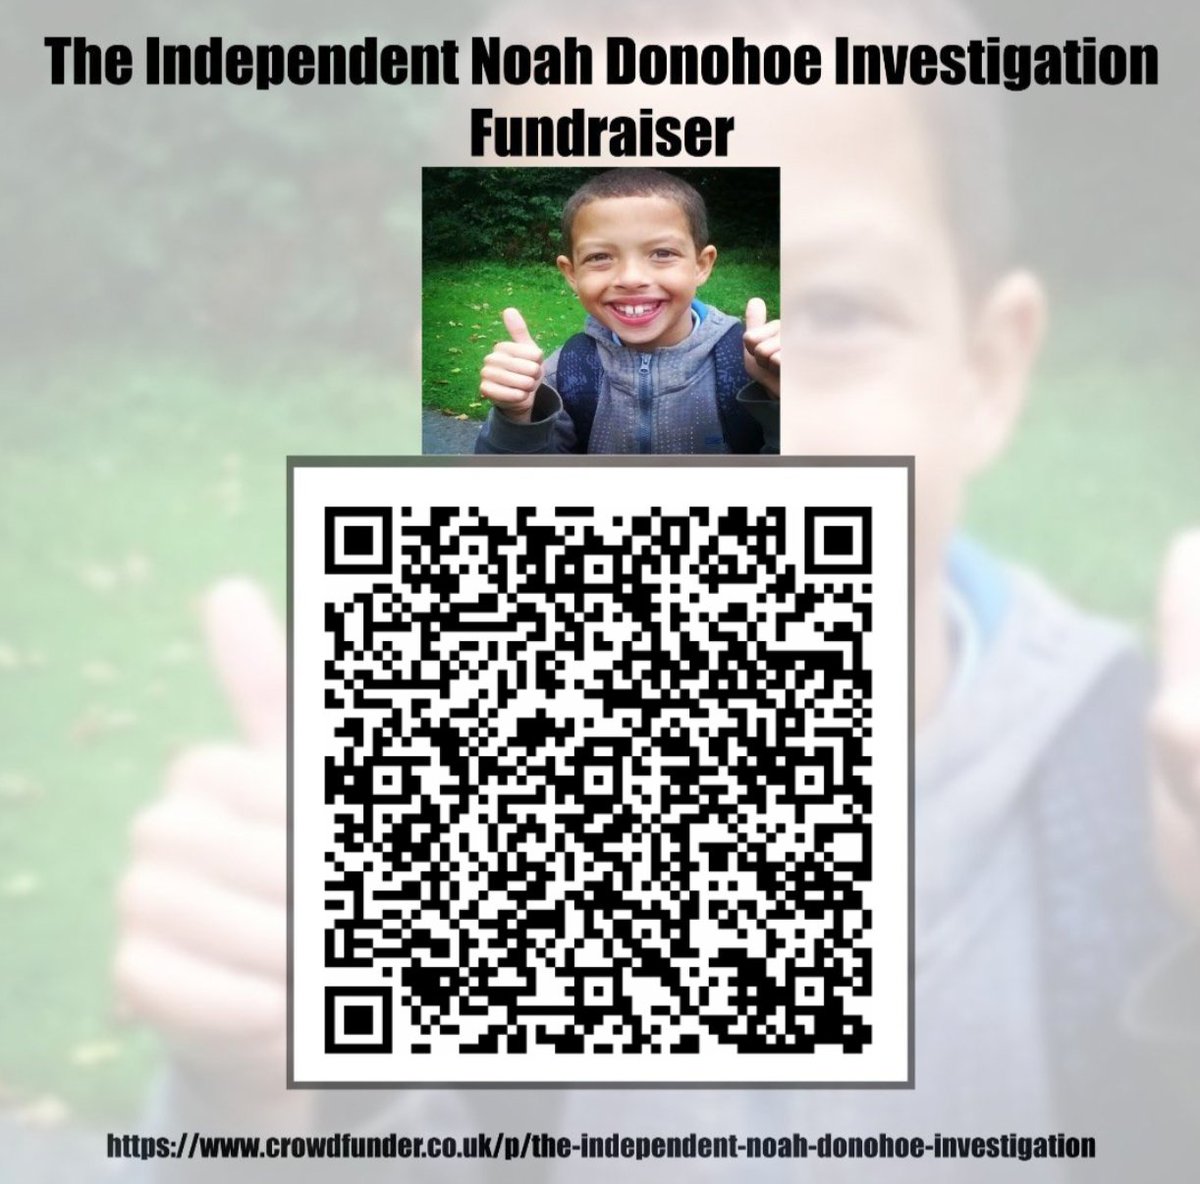 For those who have designed posters, or placed QR codes and collection boxes for our campaign in local businesses, we are so grateful to both you and the business owners. We could never have imagined this kind of grassroots support.

@donalmacintyre 
#Noahsarmy #Justicefornoah